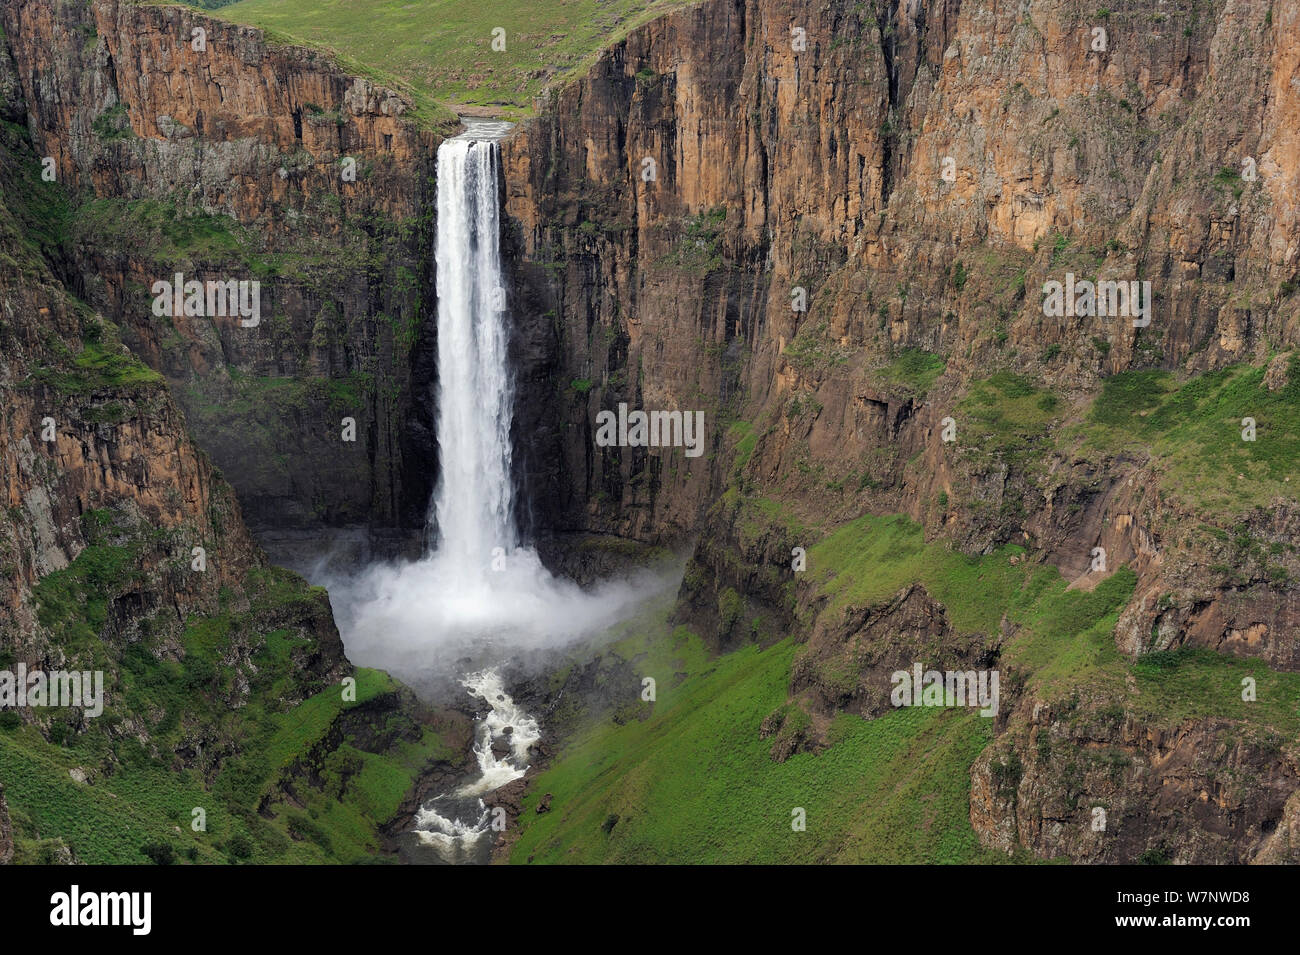 Aerial view of Maletsunyani falls Gorge, Lesotho Stock Photo